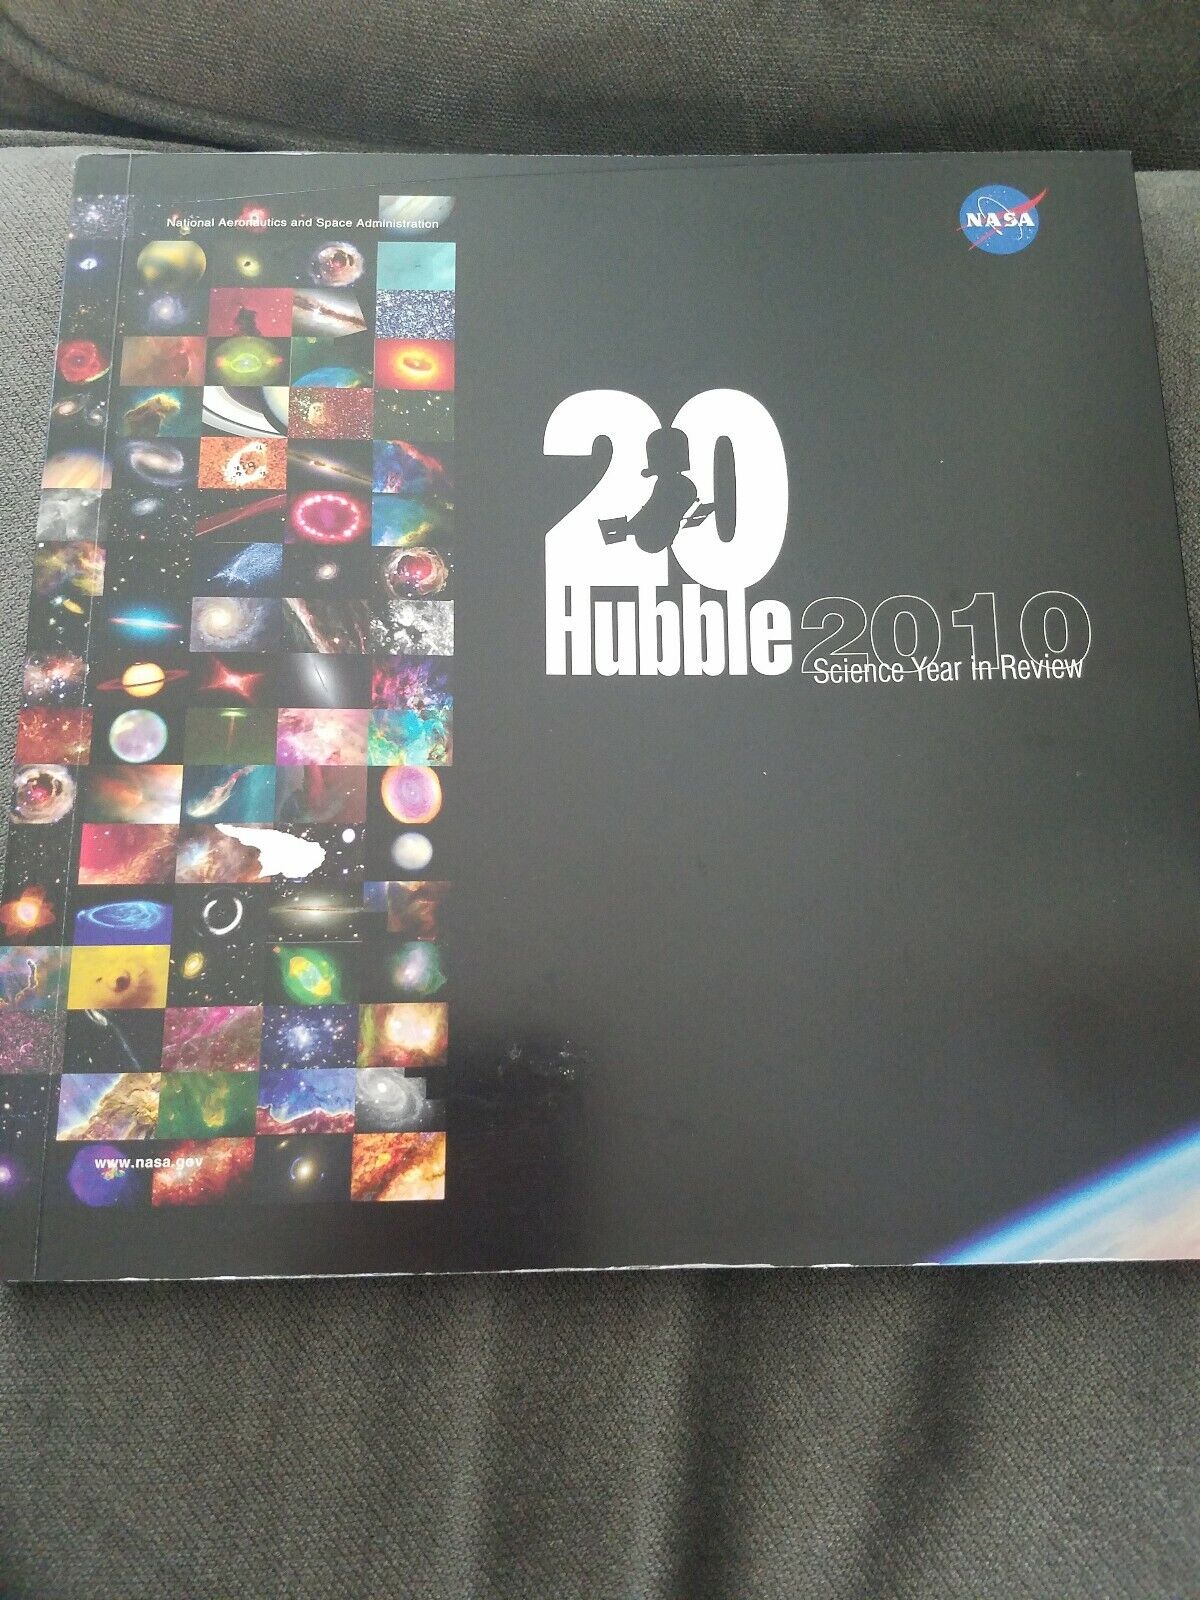 Hubble 2010 Science Year in Review